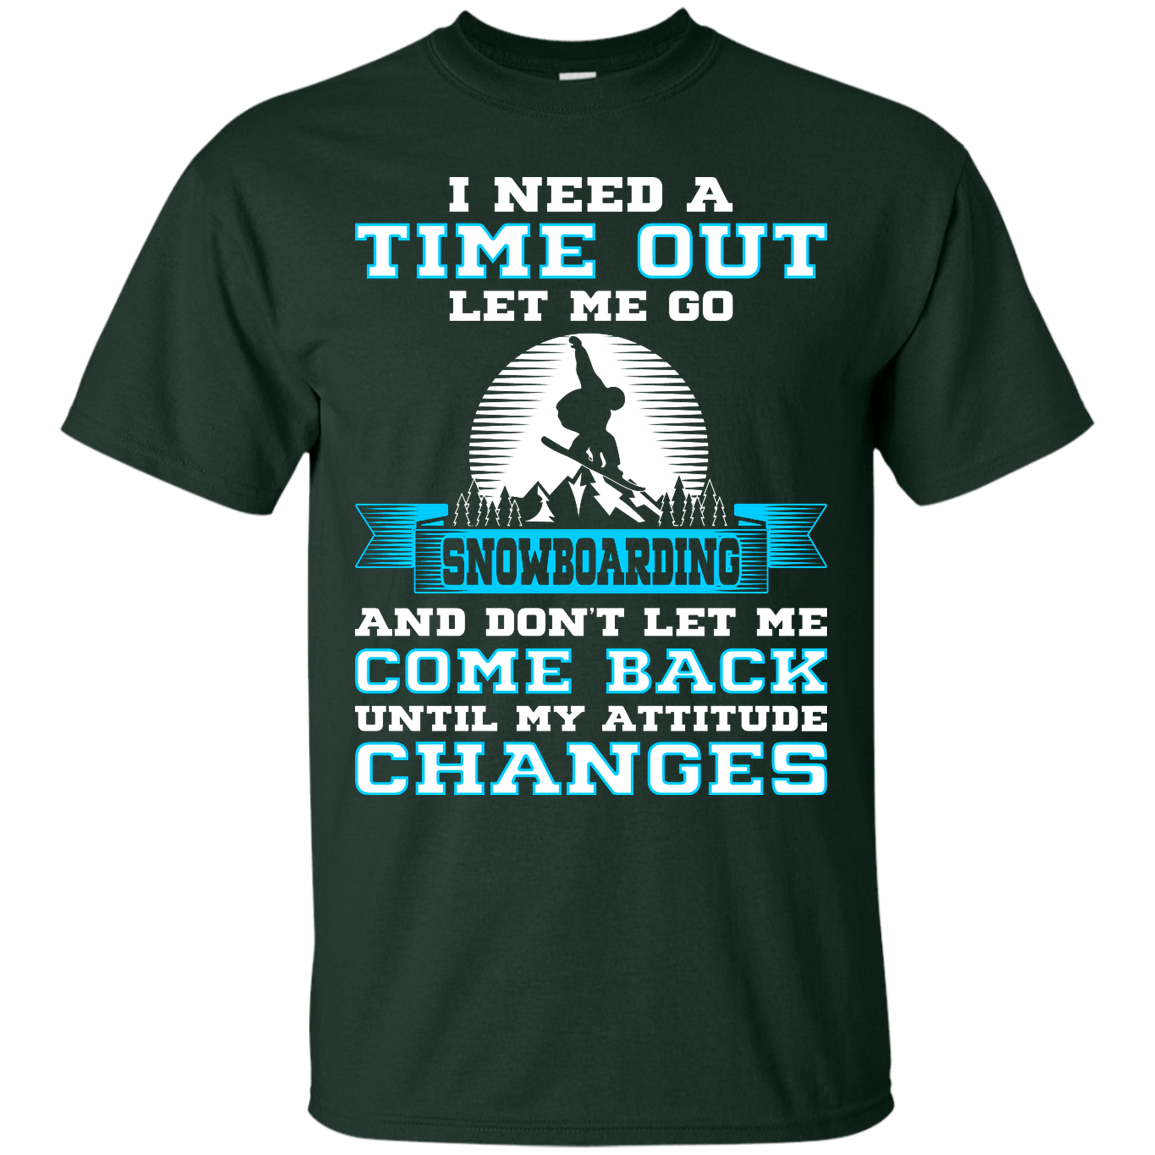 I Need A Time Out Let Me Go Snowboarding And Don't Let Me Come Back Until My Attitude Changes Tees - Powderaddicts